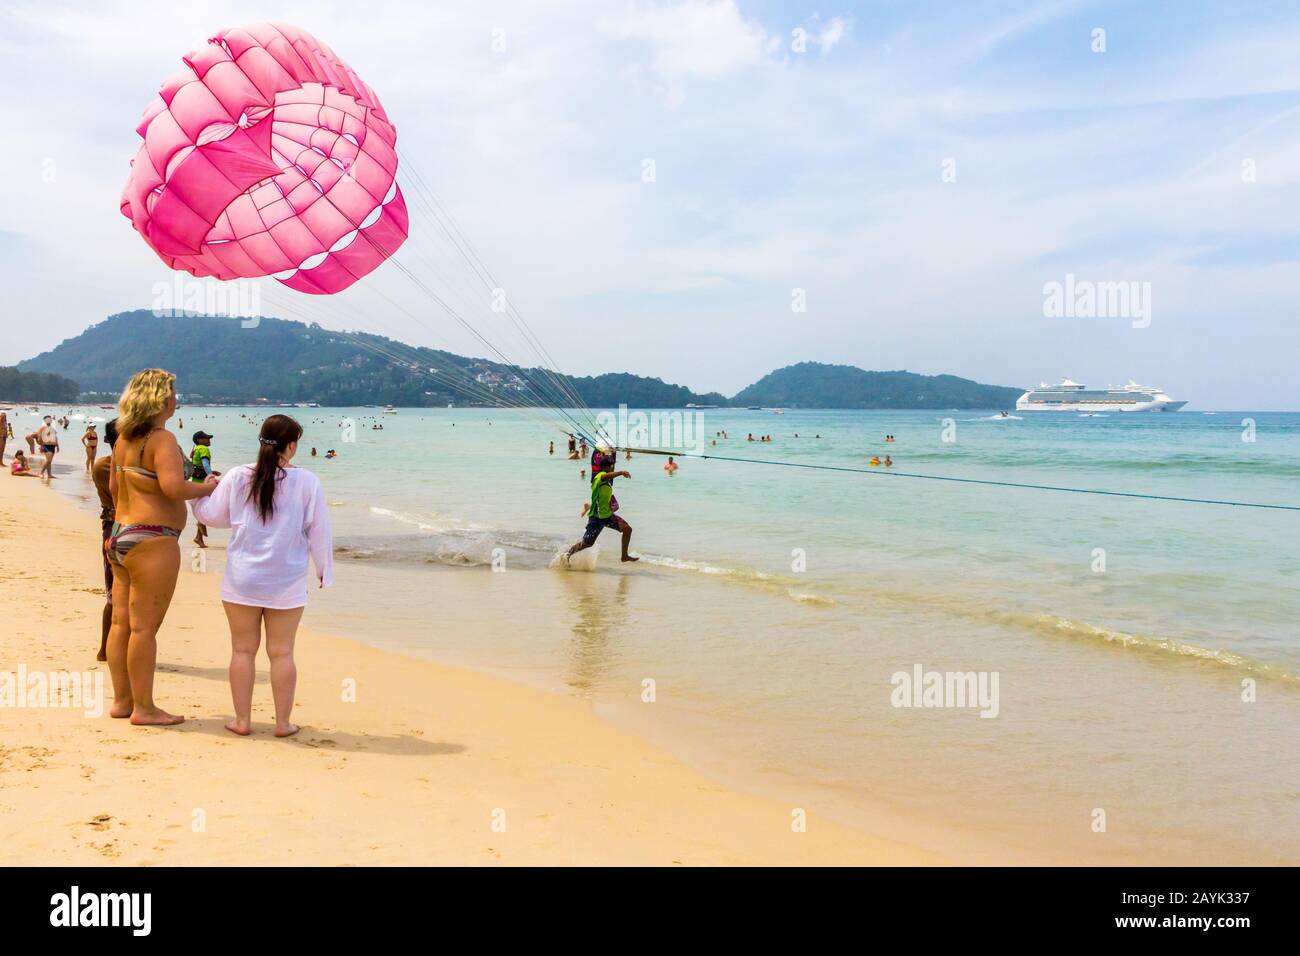 Patong, Phuket, Thailand - November 11th 2017: Parasailing off the beach. This is a popular water sport activity with tourists. Stock Photo